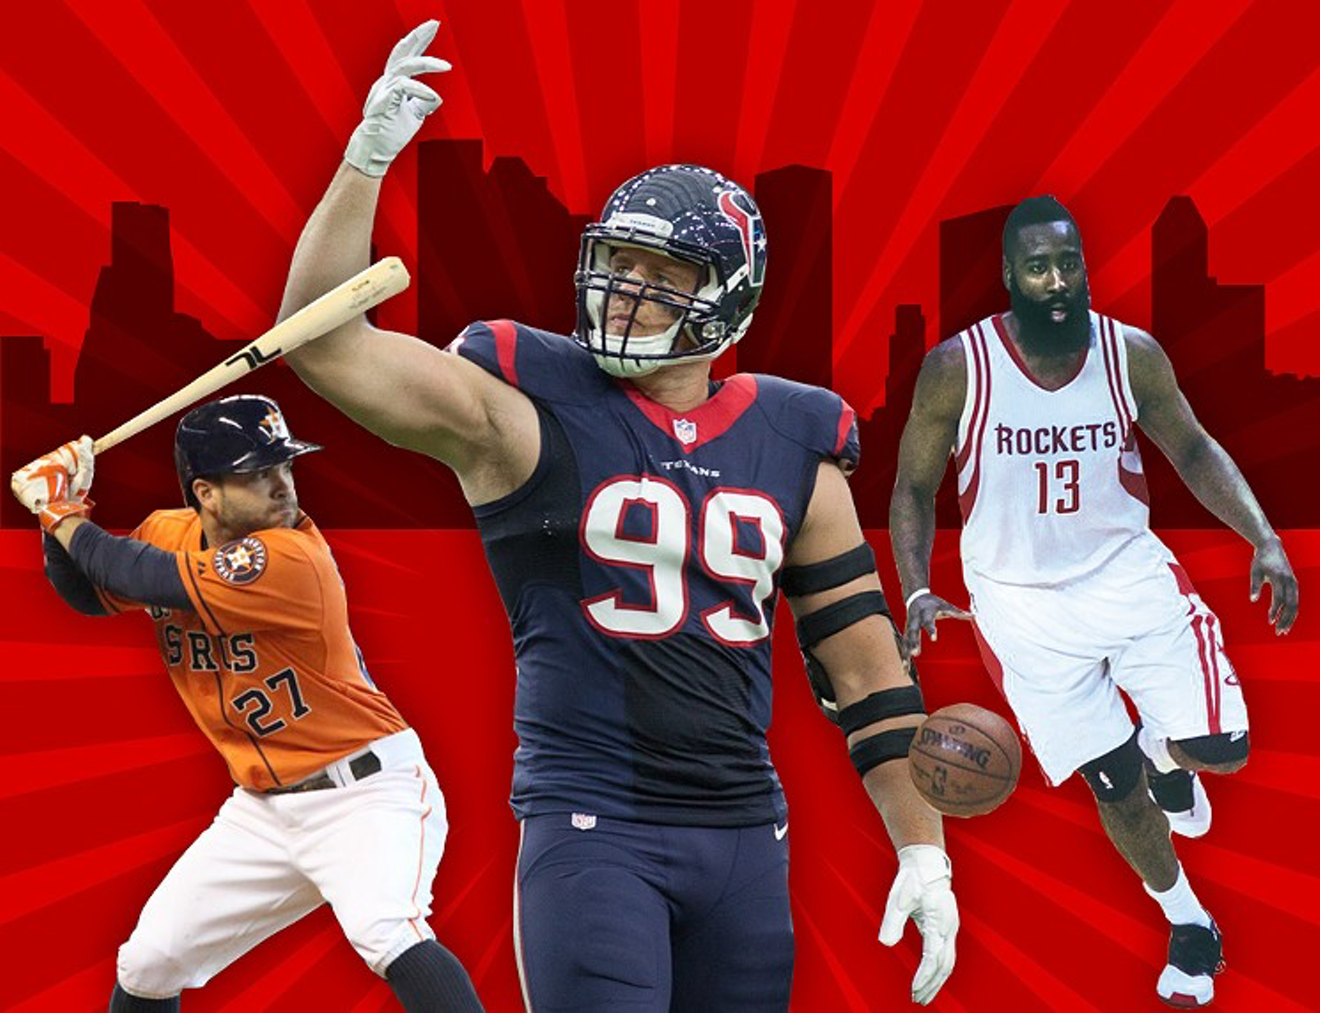 Thanks to crazy vote totals for Altuve, Harden, and Watt, Houston is the MVC — Most Valuable City.